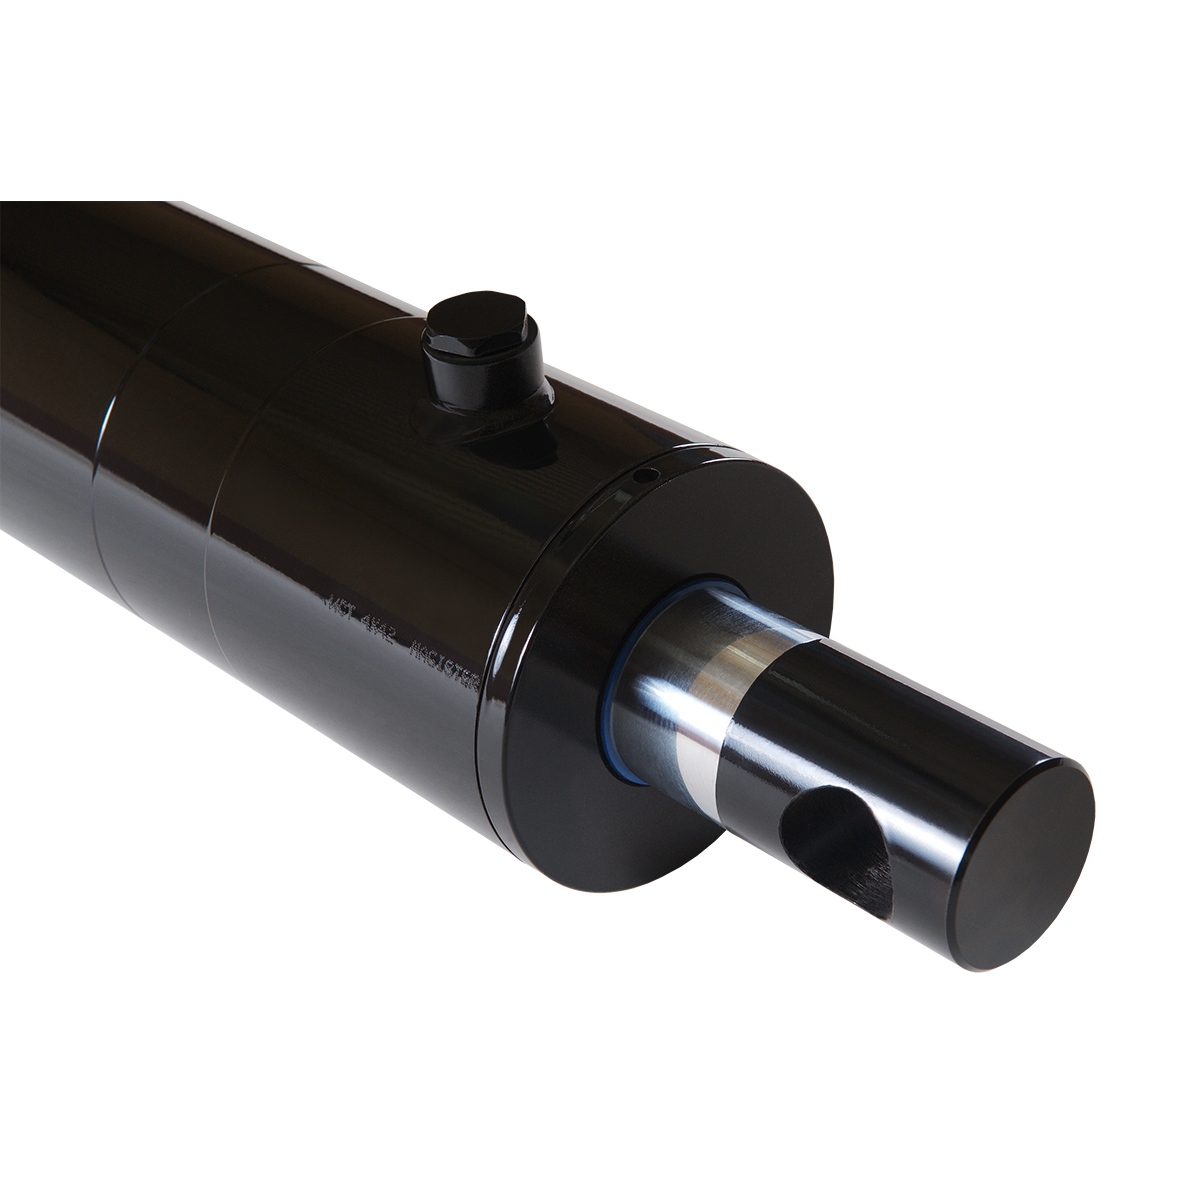 3.5 bore x 24 stroke hydraulic cylinder, welded pin eye double acting